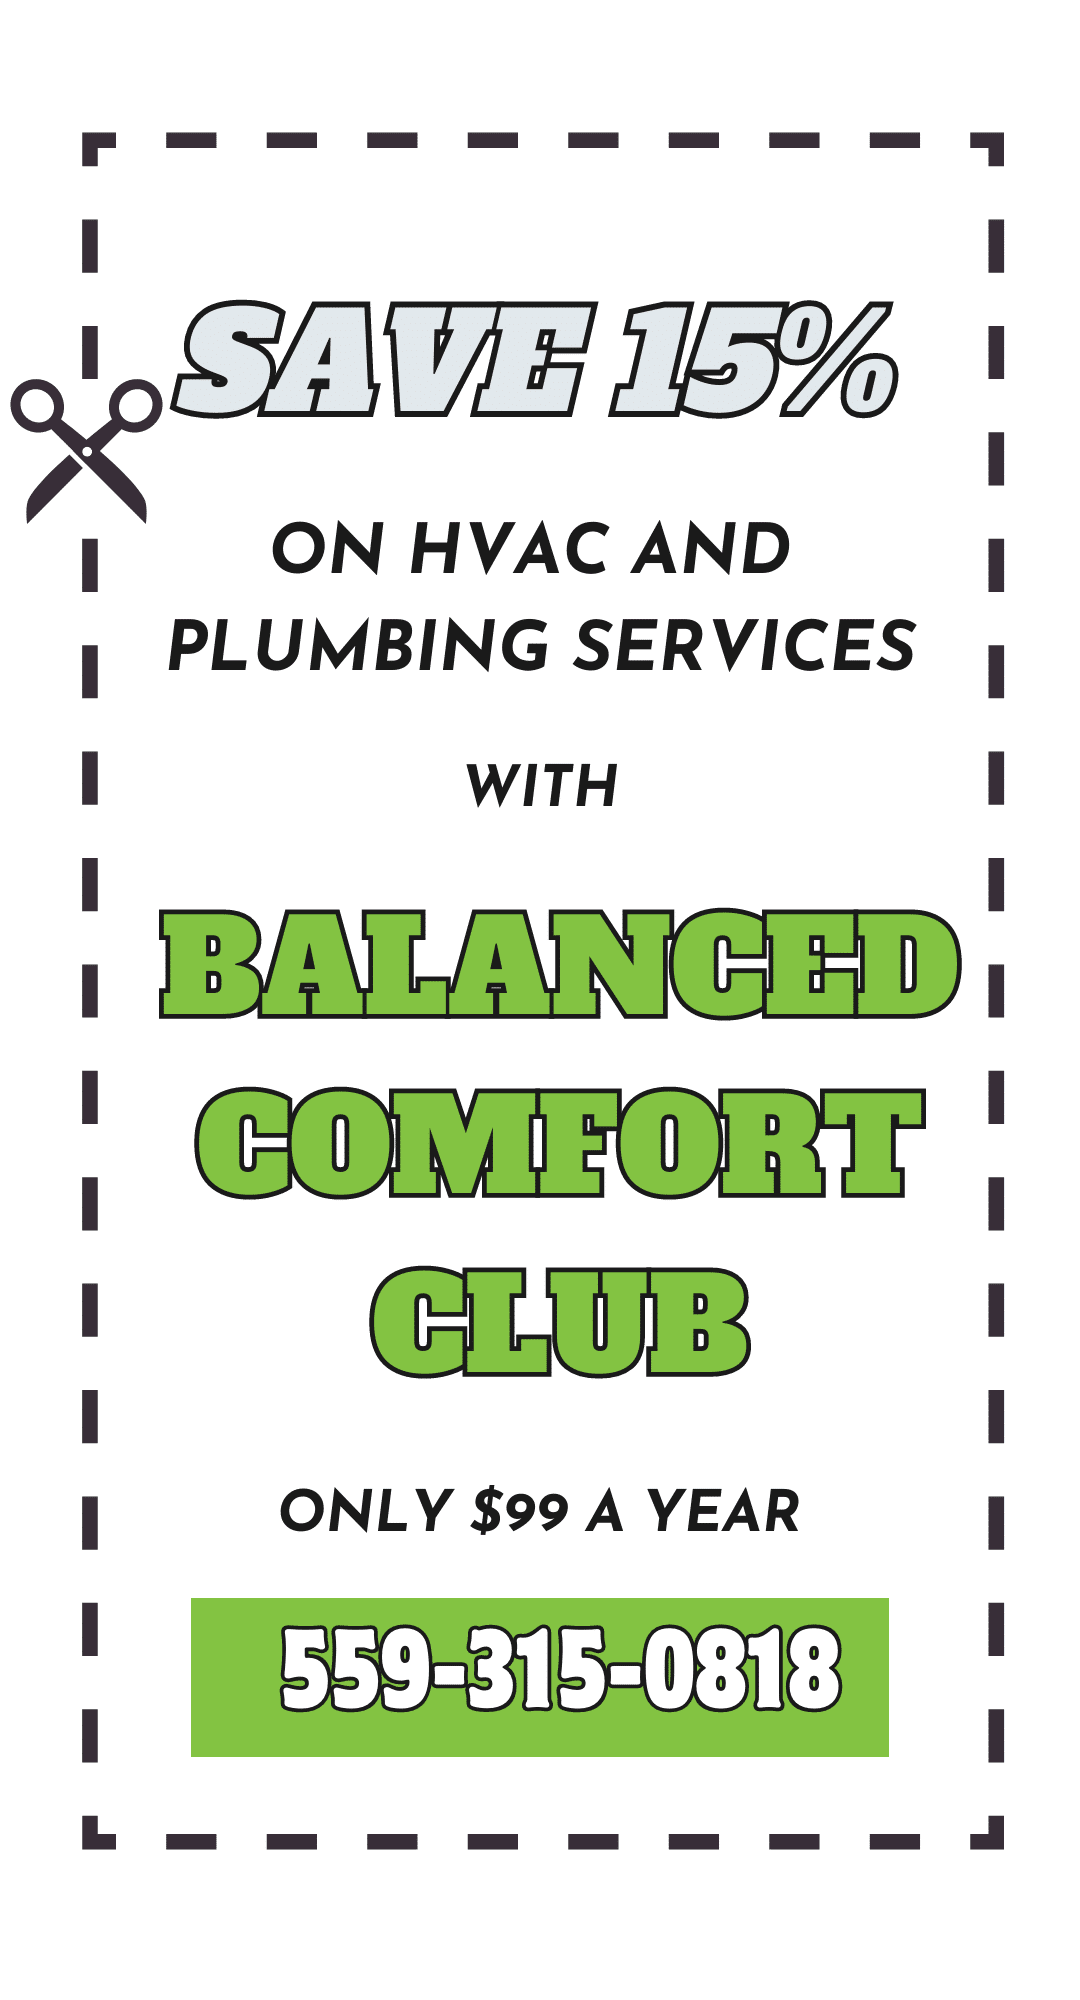 Save 15% on HVAC and Plumbing services by signing up for our Balanced Comfort Club today.